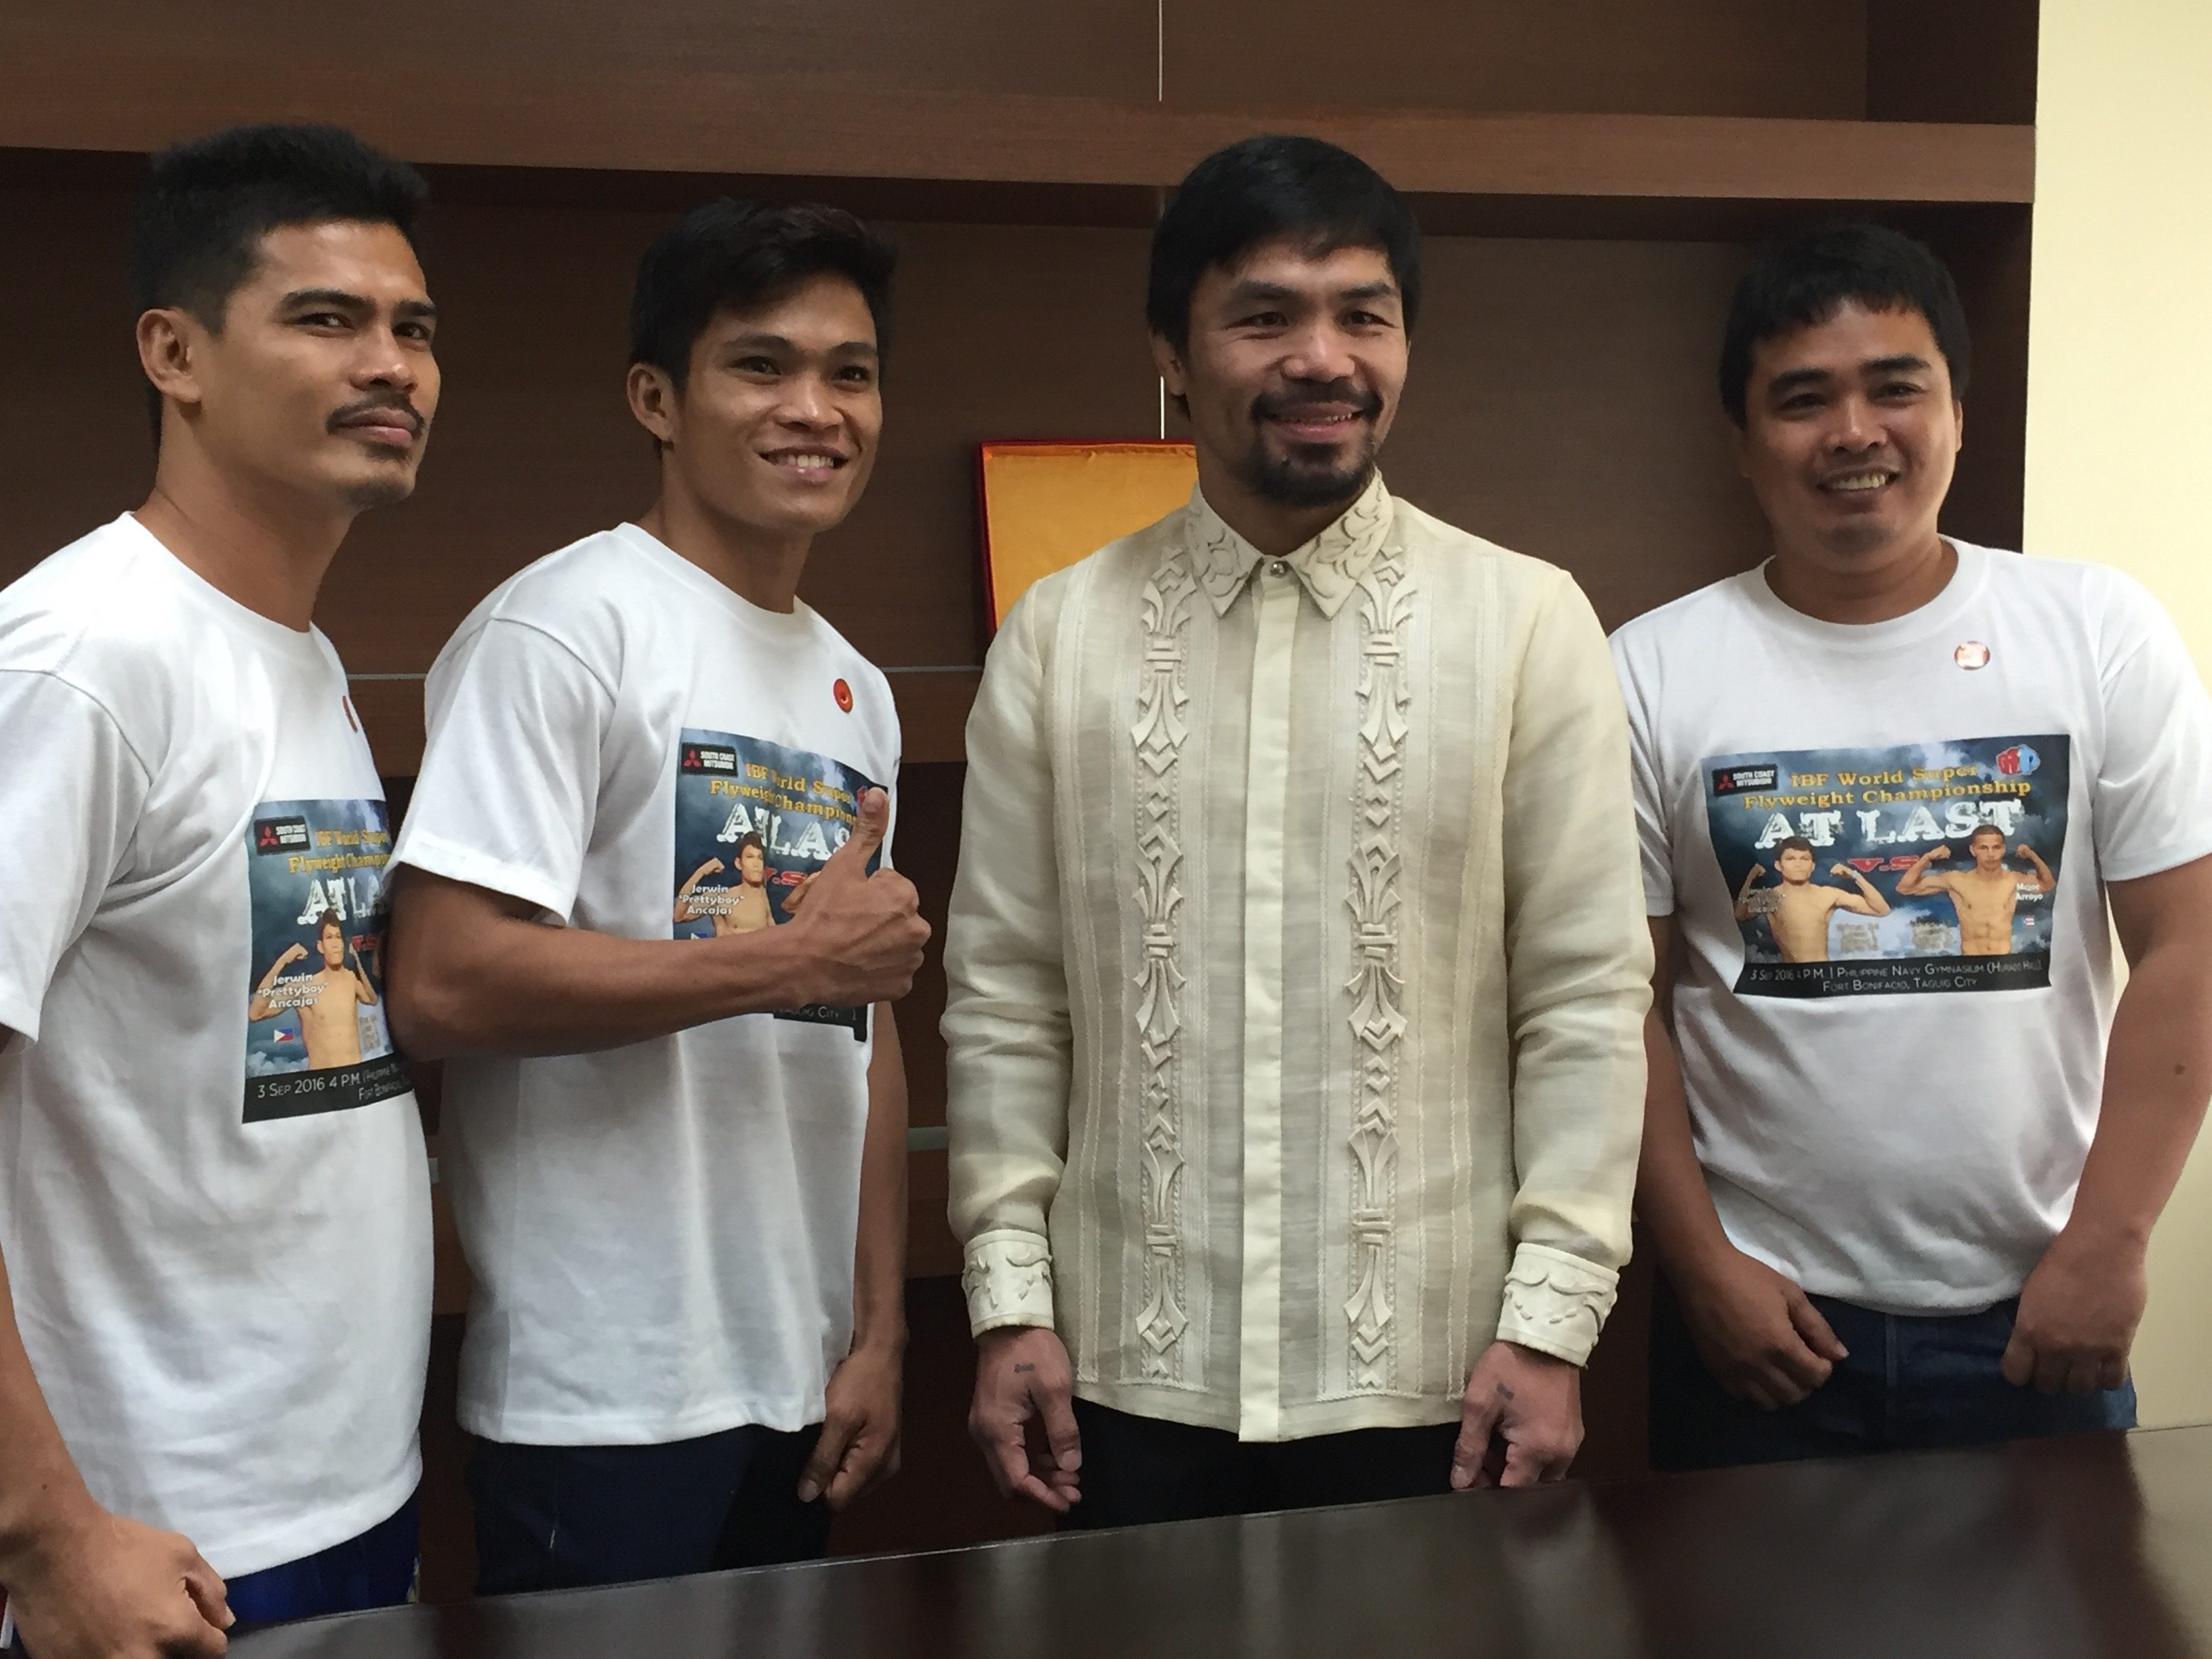 Manny Pacquiao poses with Drian Francisco (far left), Jerwin Ancajas (second from left) and Joven Jimenez (R). Photo by Ryan Songalia/Rappler  